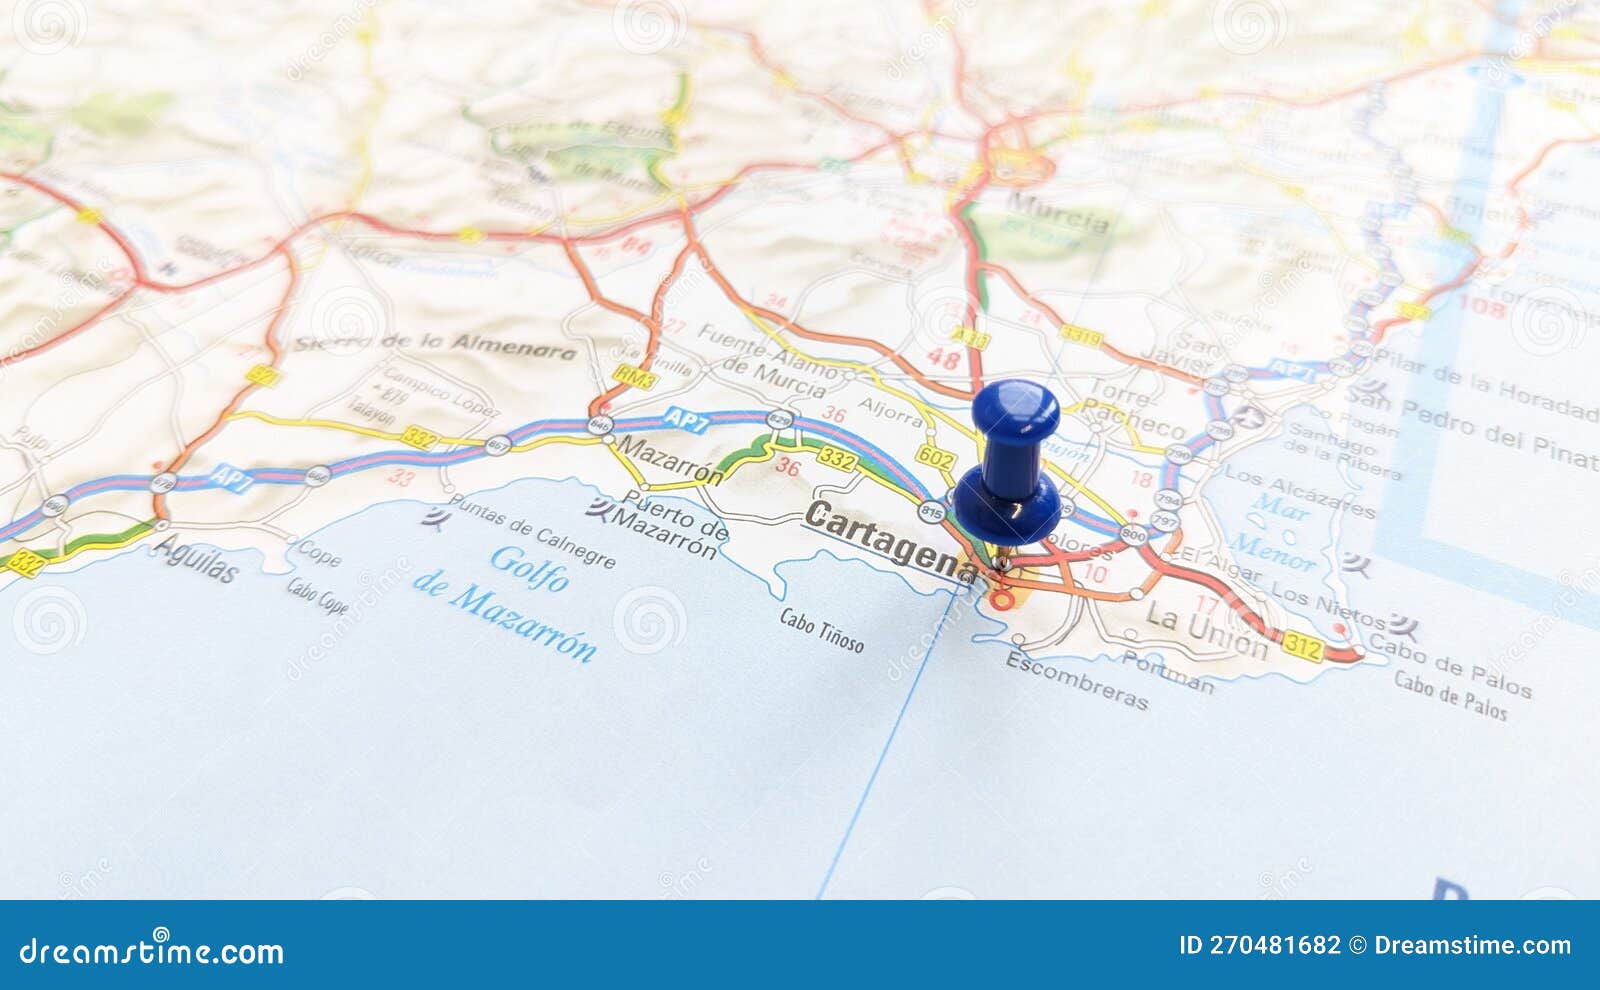 a blue pin stuck in cartagena on a map of spain